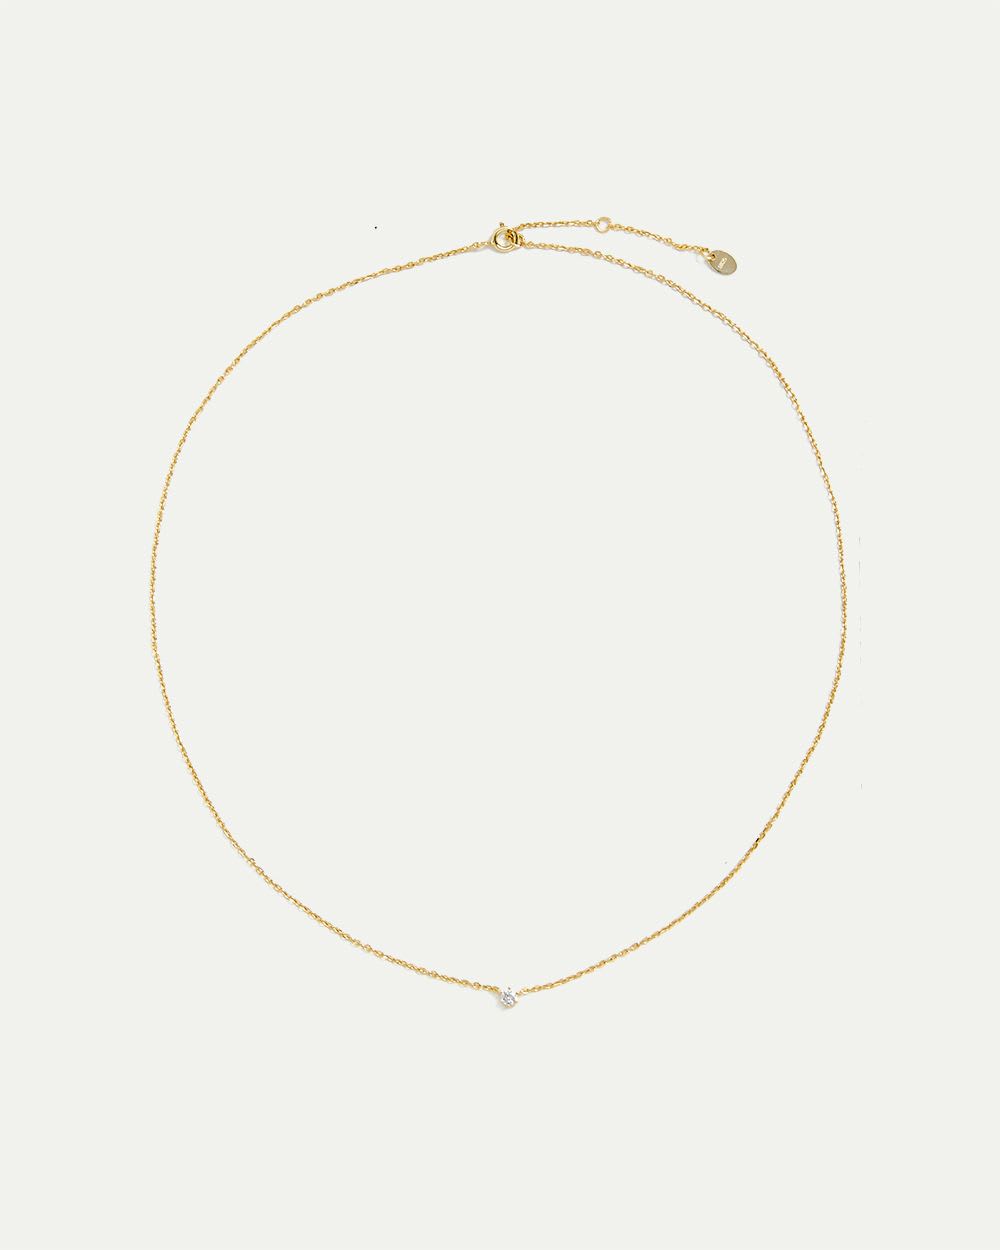 Gold-Plated Delicate Short Necklace with Cubic Zirconia Pendant